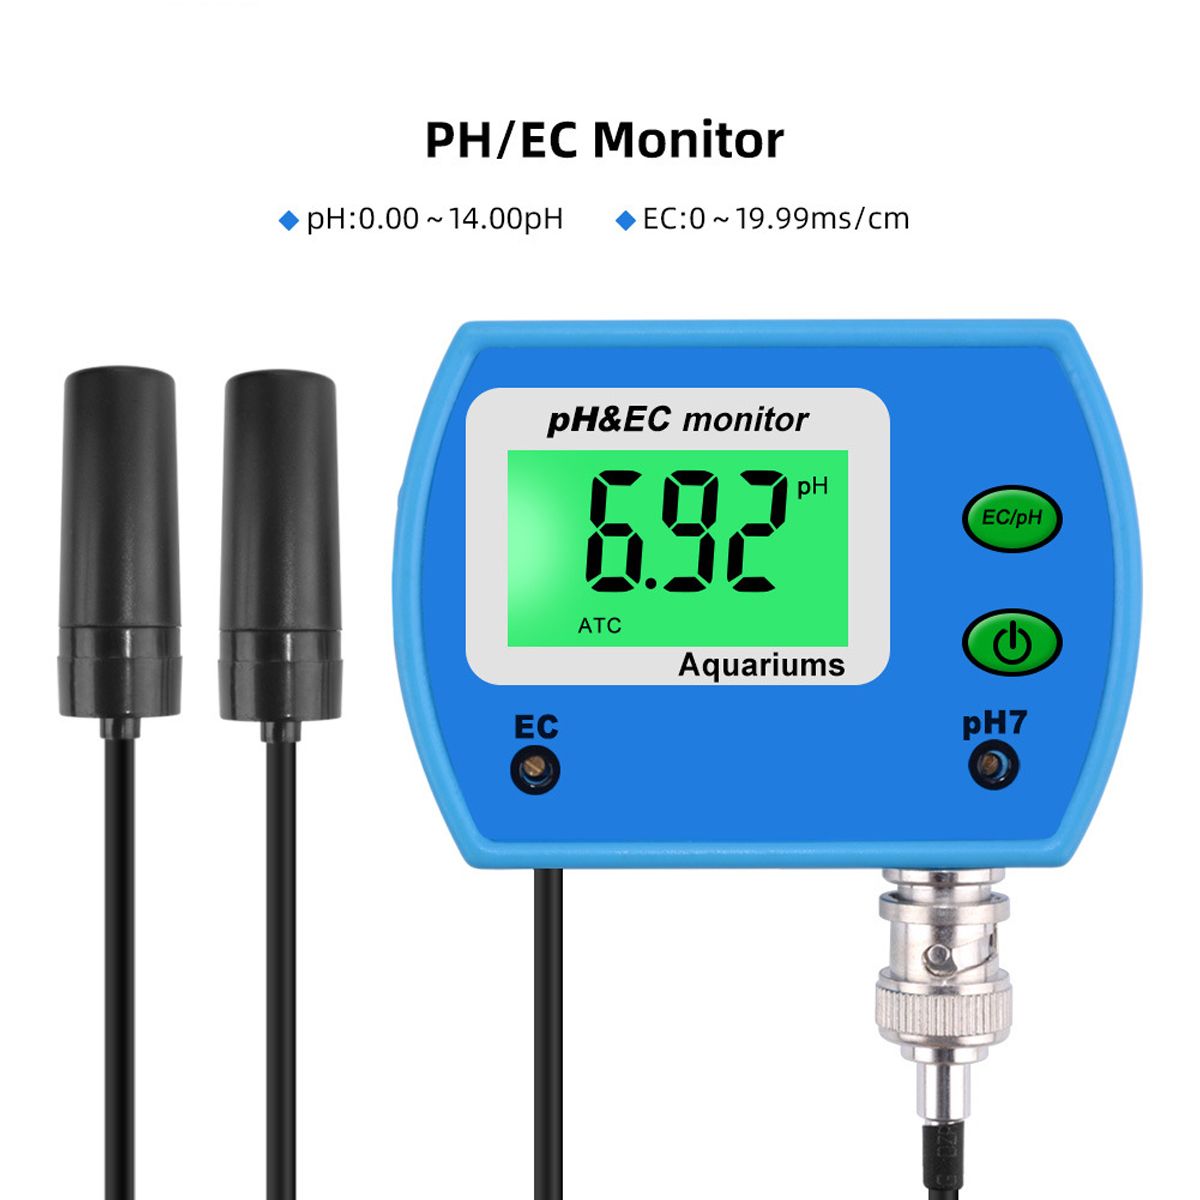 PHEC-2-in1-Water-Quality-Chlorine-Tester-Level-Meters-Swimming-Pool-Spa-Hot-Tub-1721851